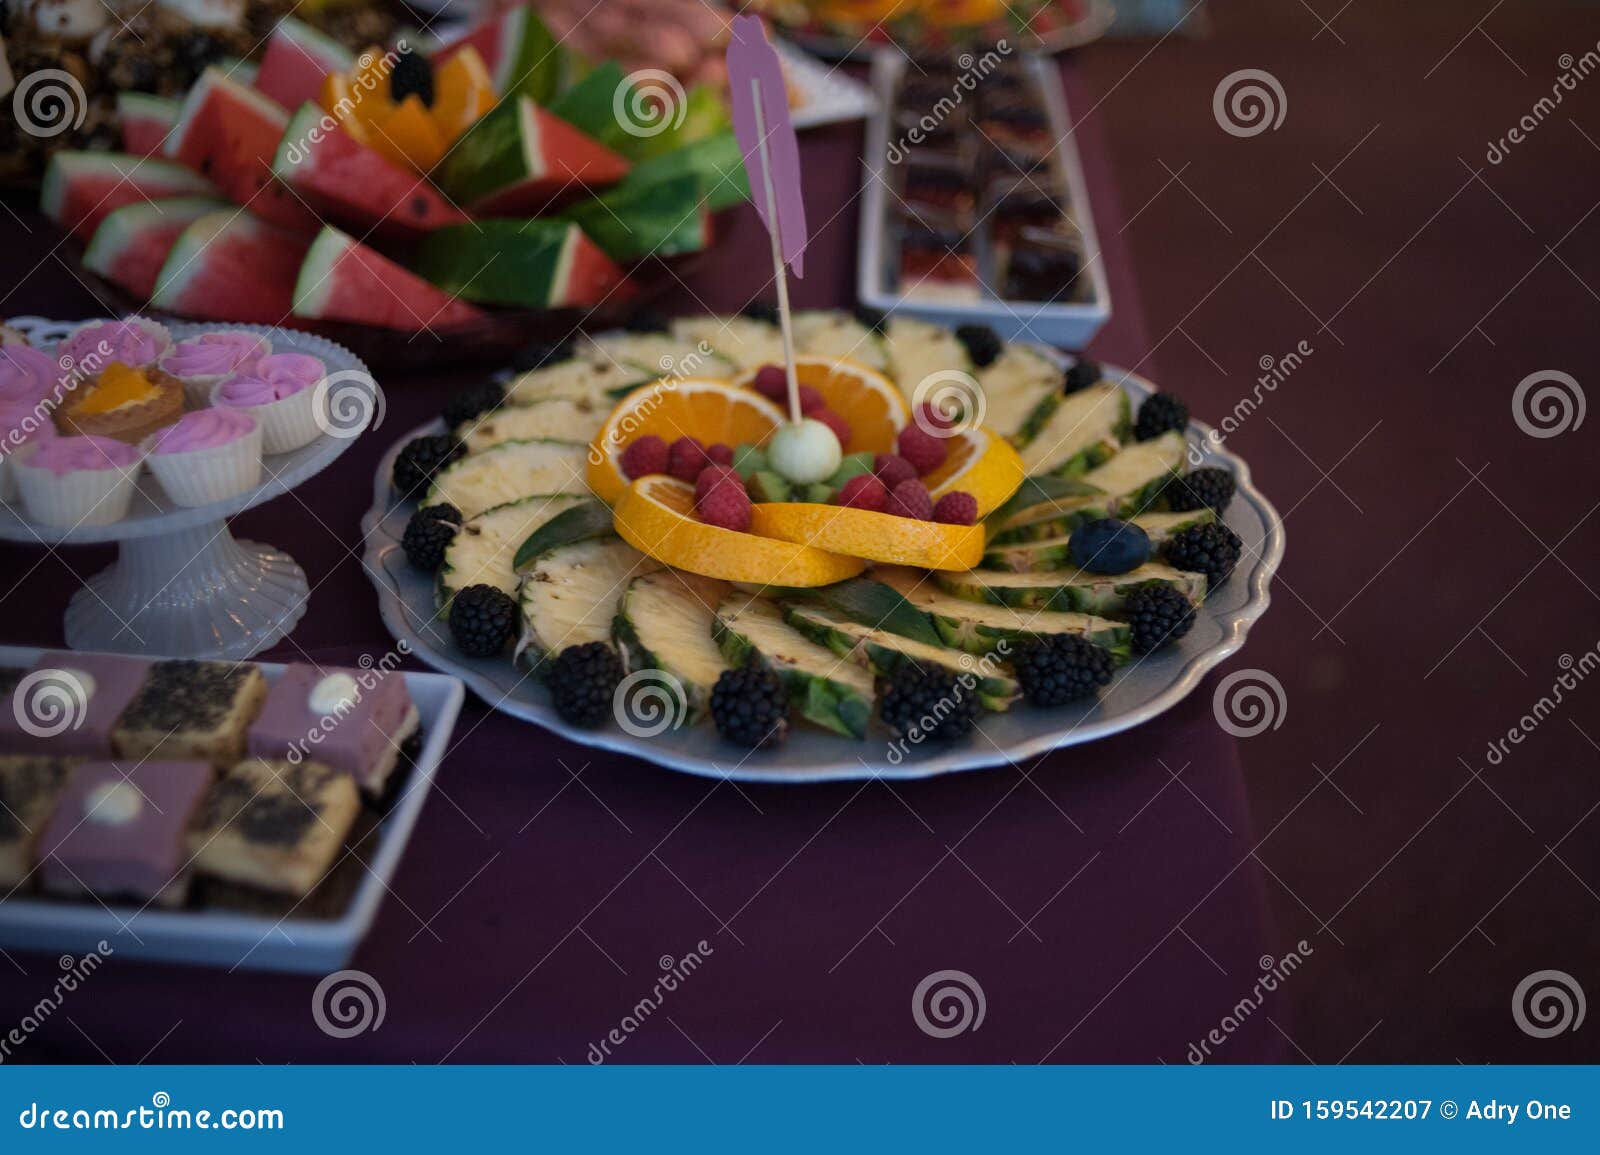 sweet candy bar.different delicious fruits and cookies on wedding reception table with bananas and grapes